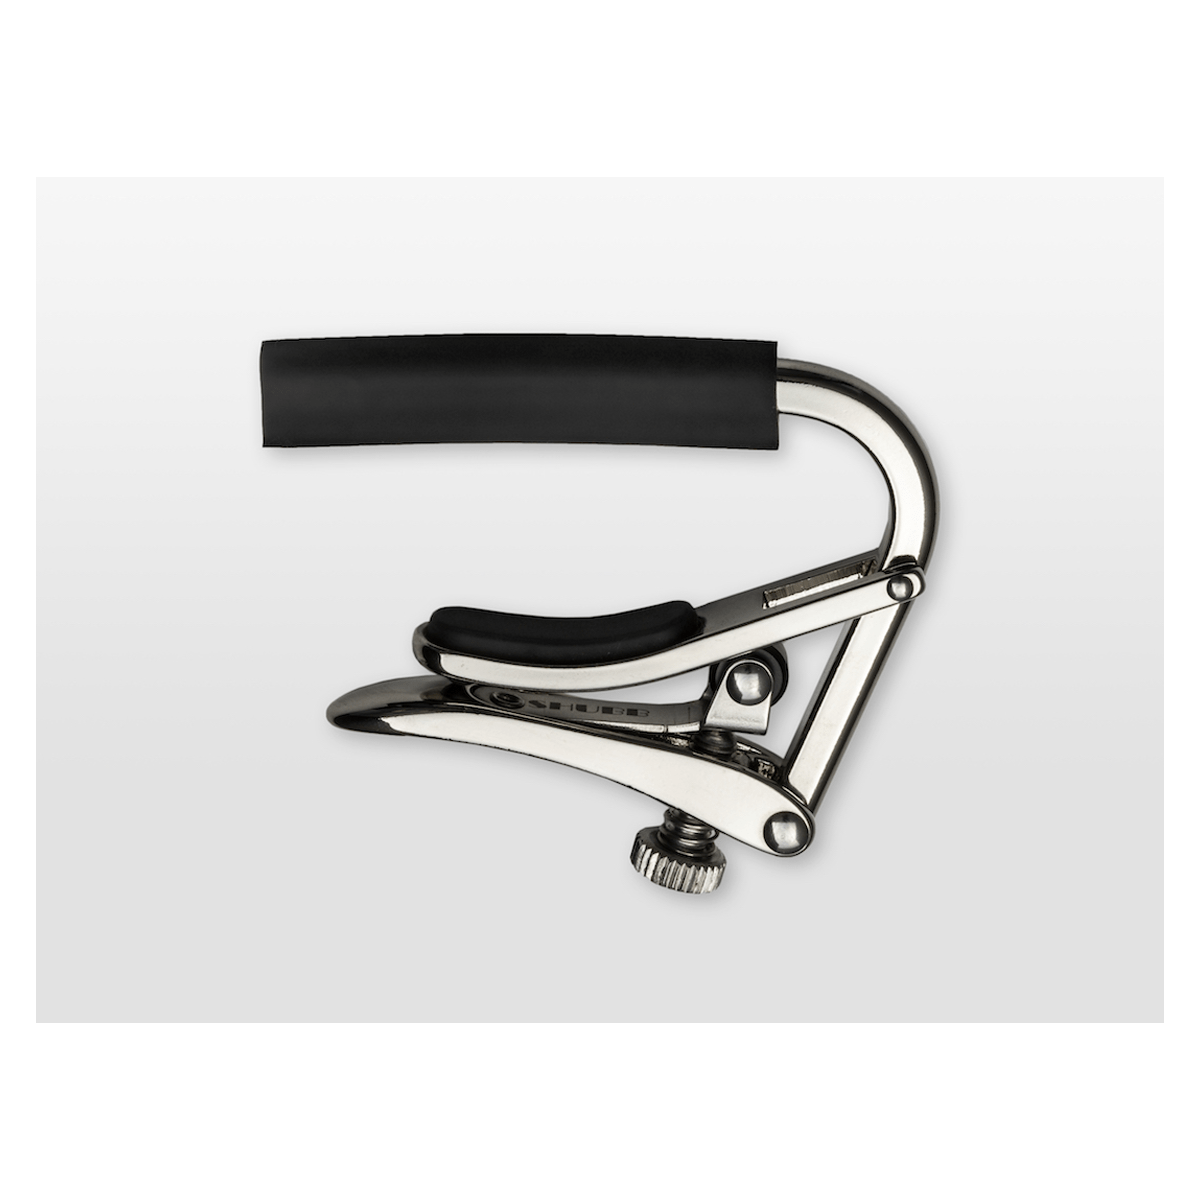 SHUBB Home Page Shubb C1 Nickel Capo for Acoustic Or Electric Guitar - Byron Music